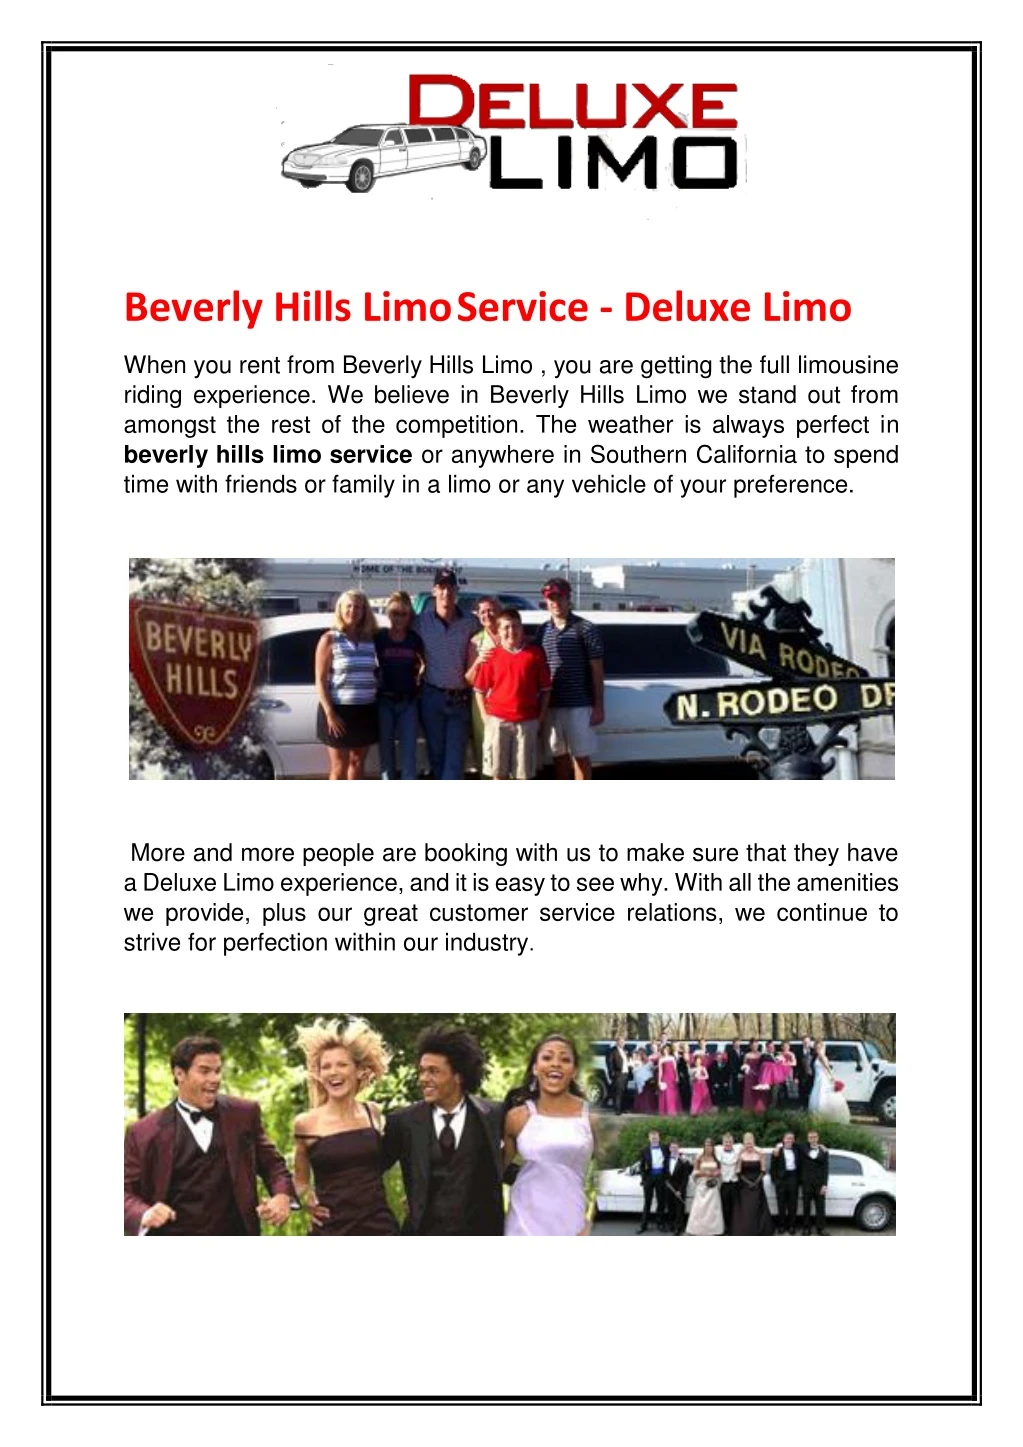 beverly hills limo service deluxe limo